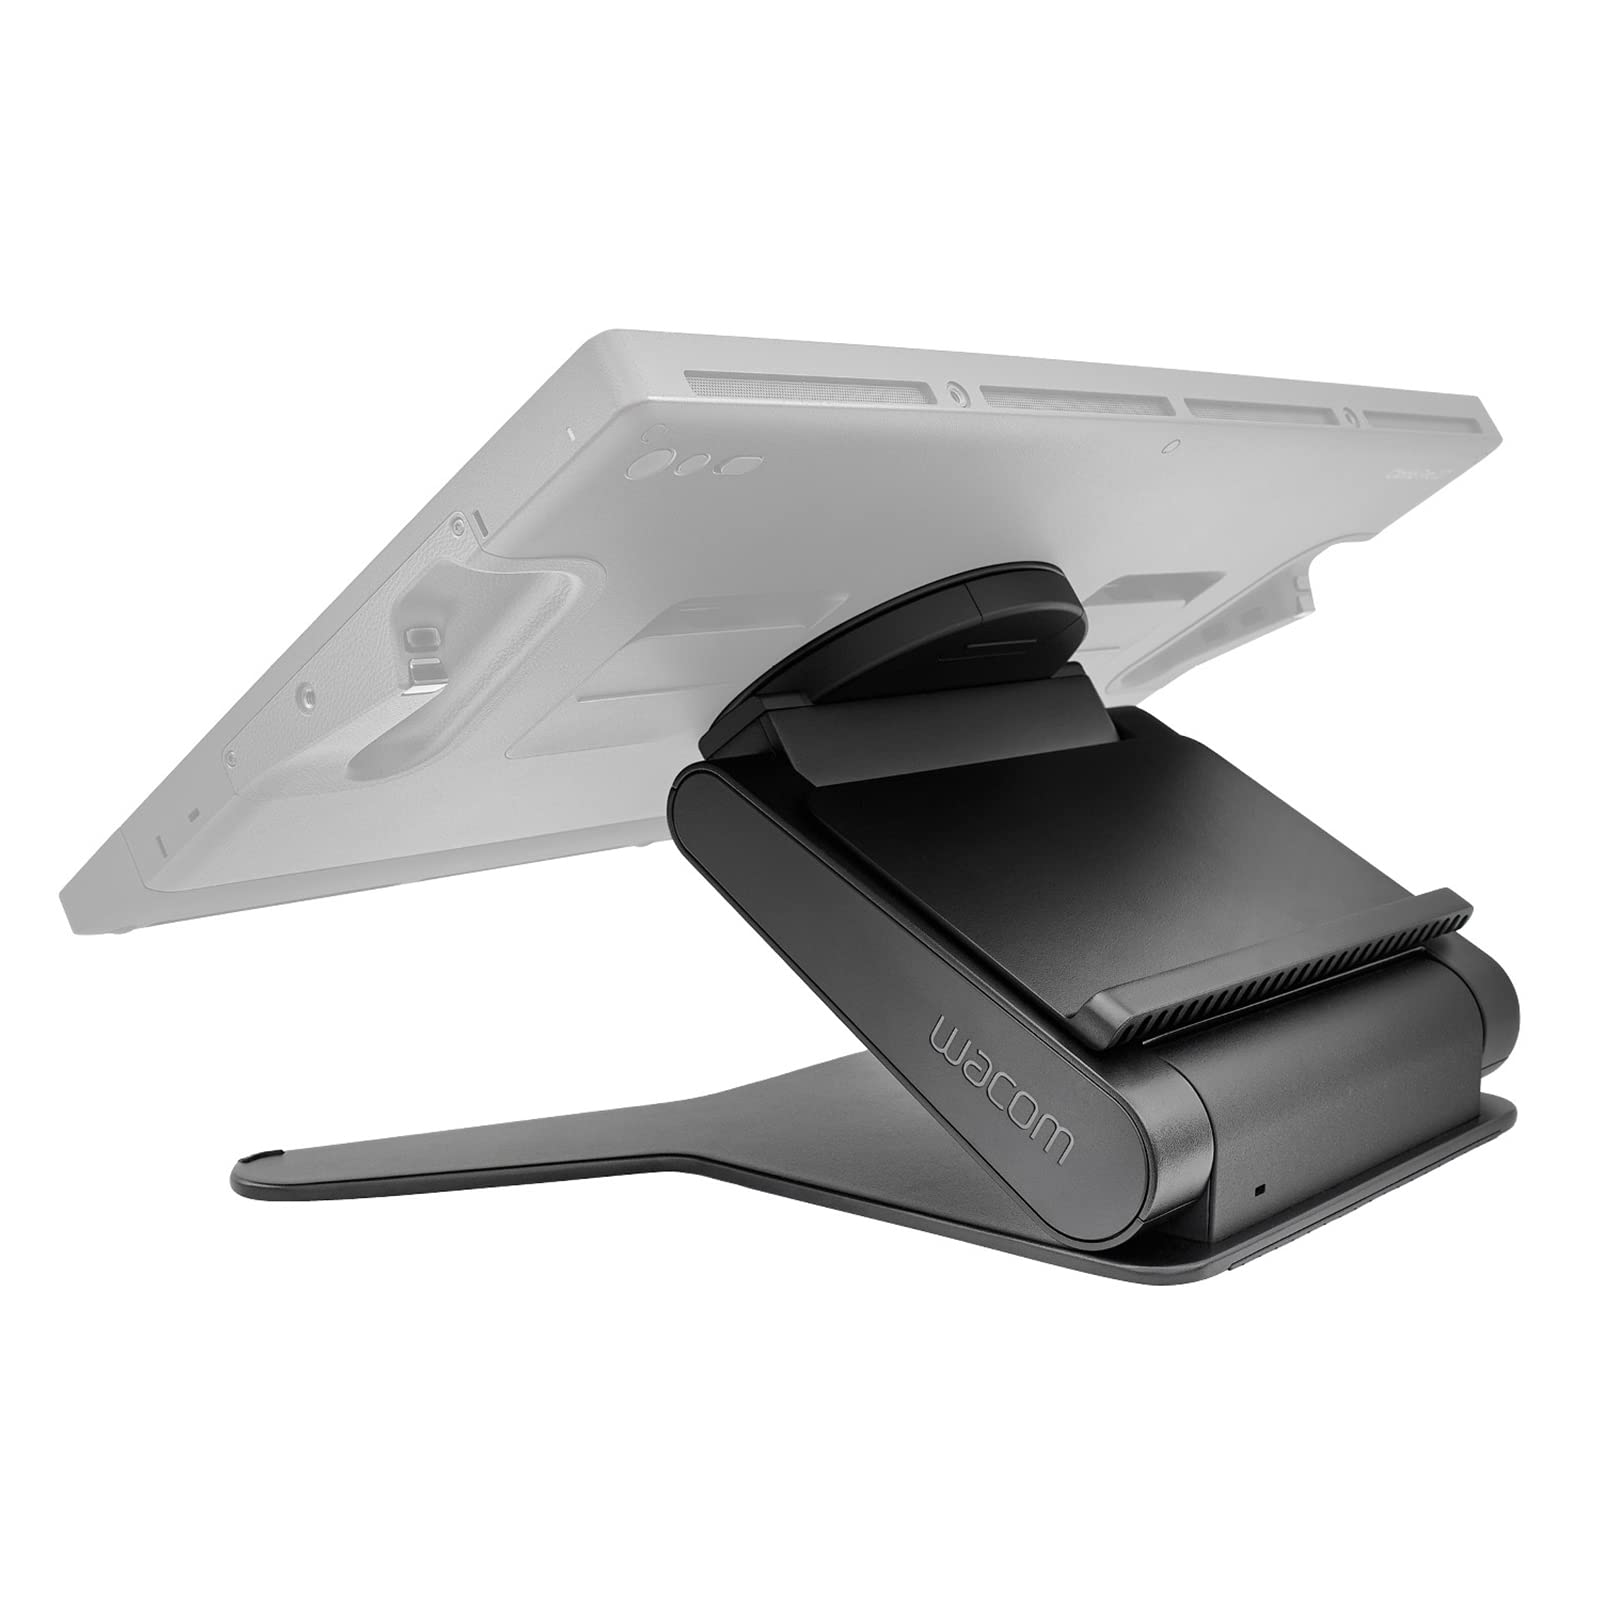 STAND FOR CINTIQ PRO 27